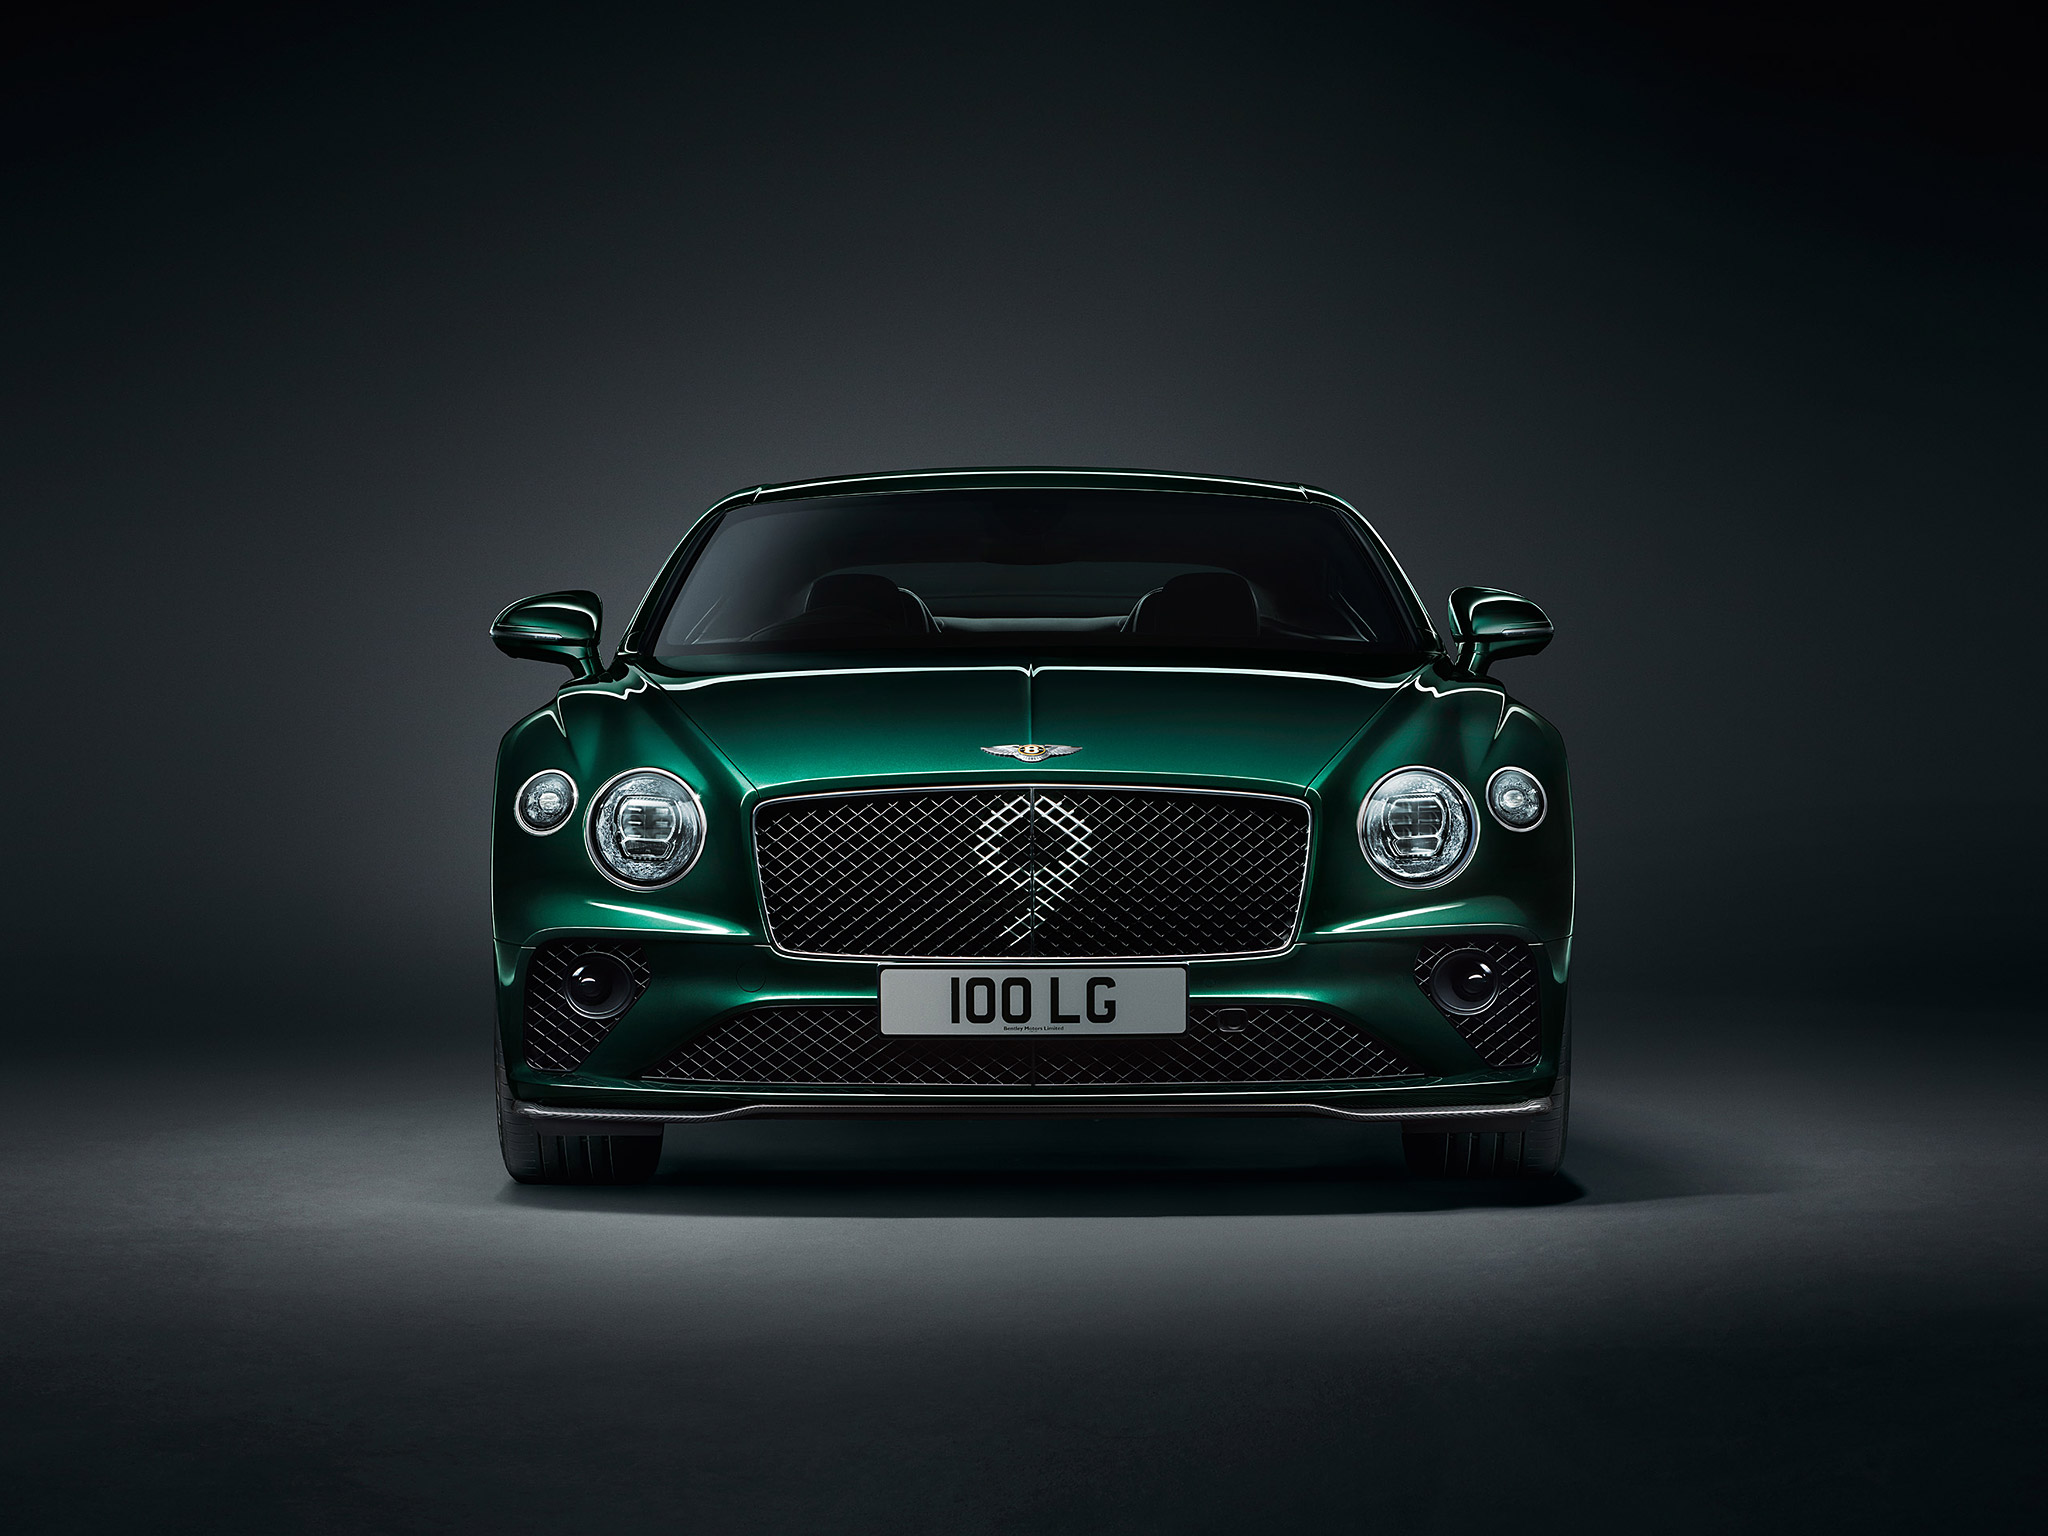  2019 Bentley Continental GT Number 9 Edition by Mulliner Wallpaper.